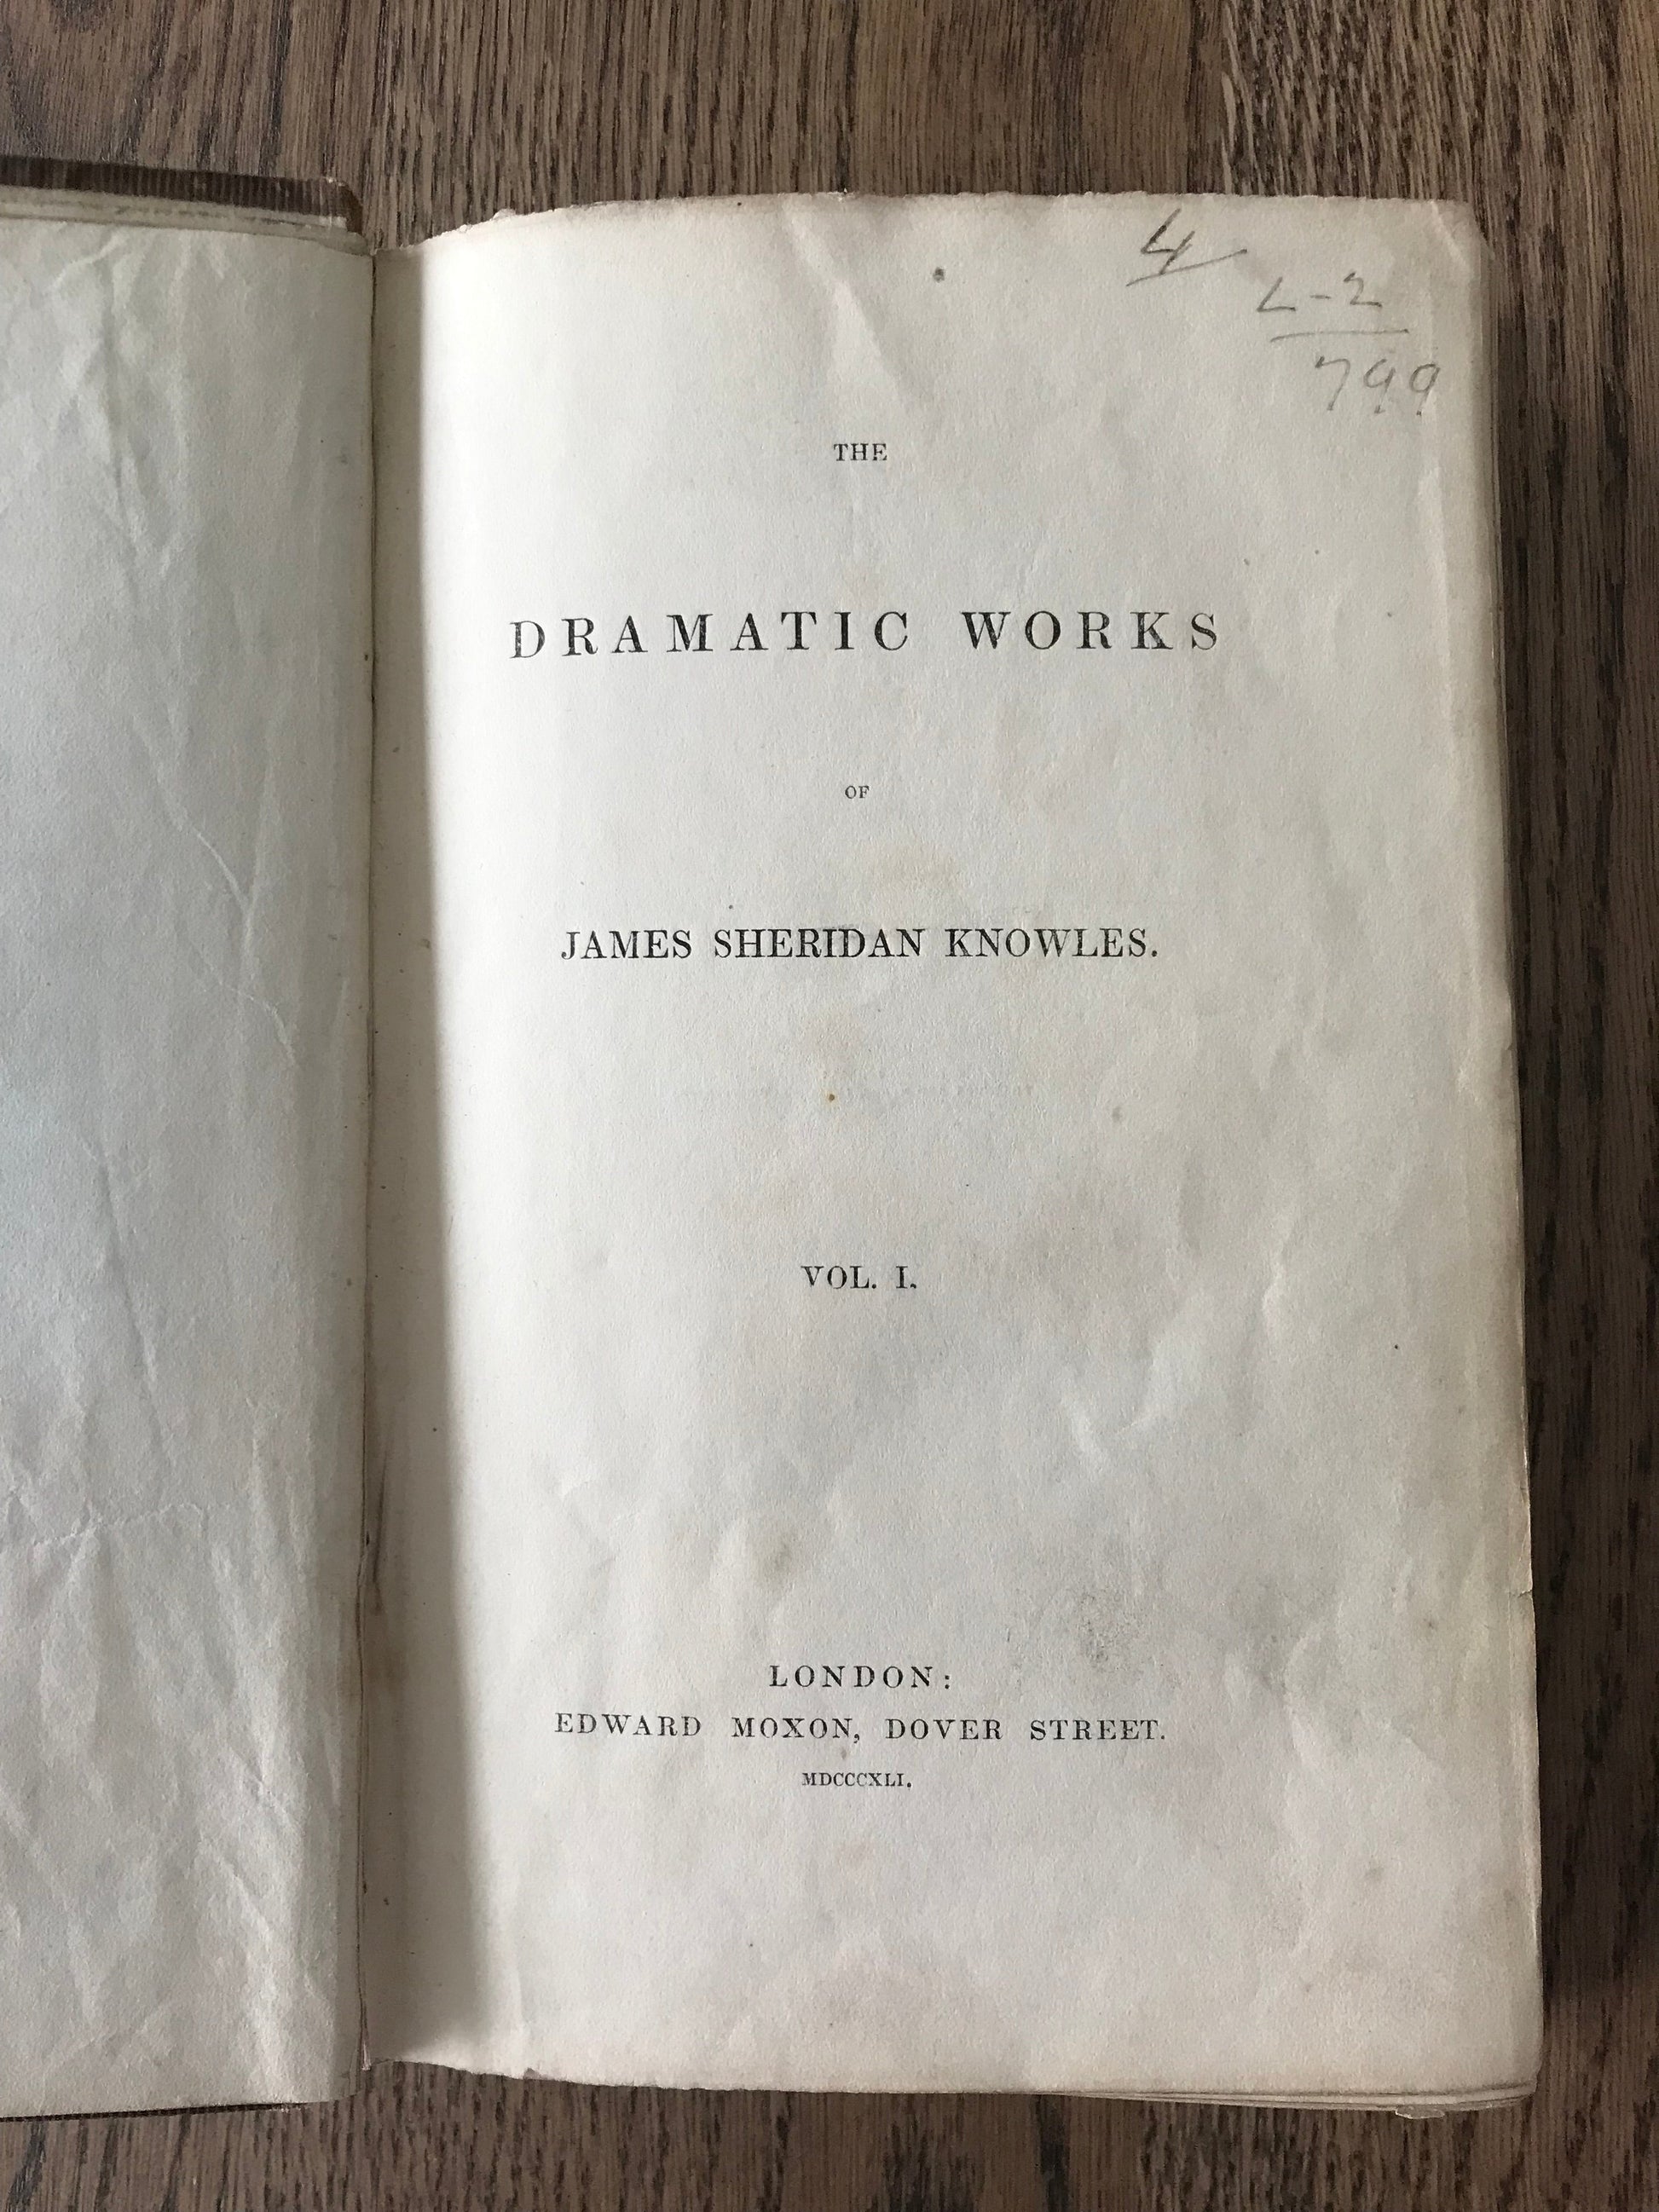 THE DRAMATIC WORKS - BY JAMES SHERIDAN KNOWLES BooksCardsNBikes